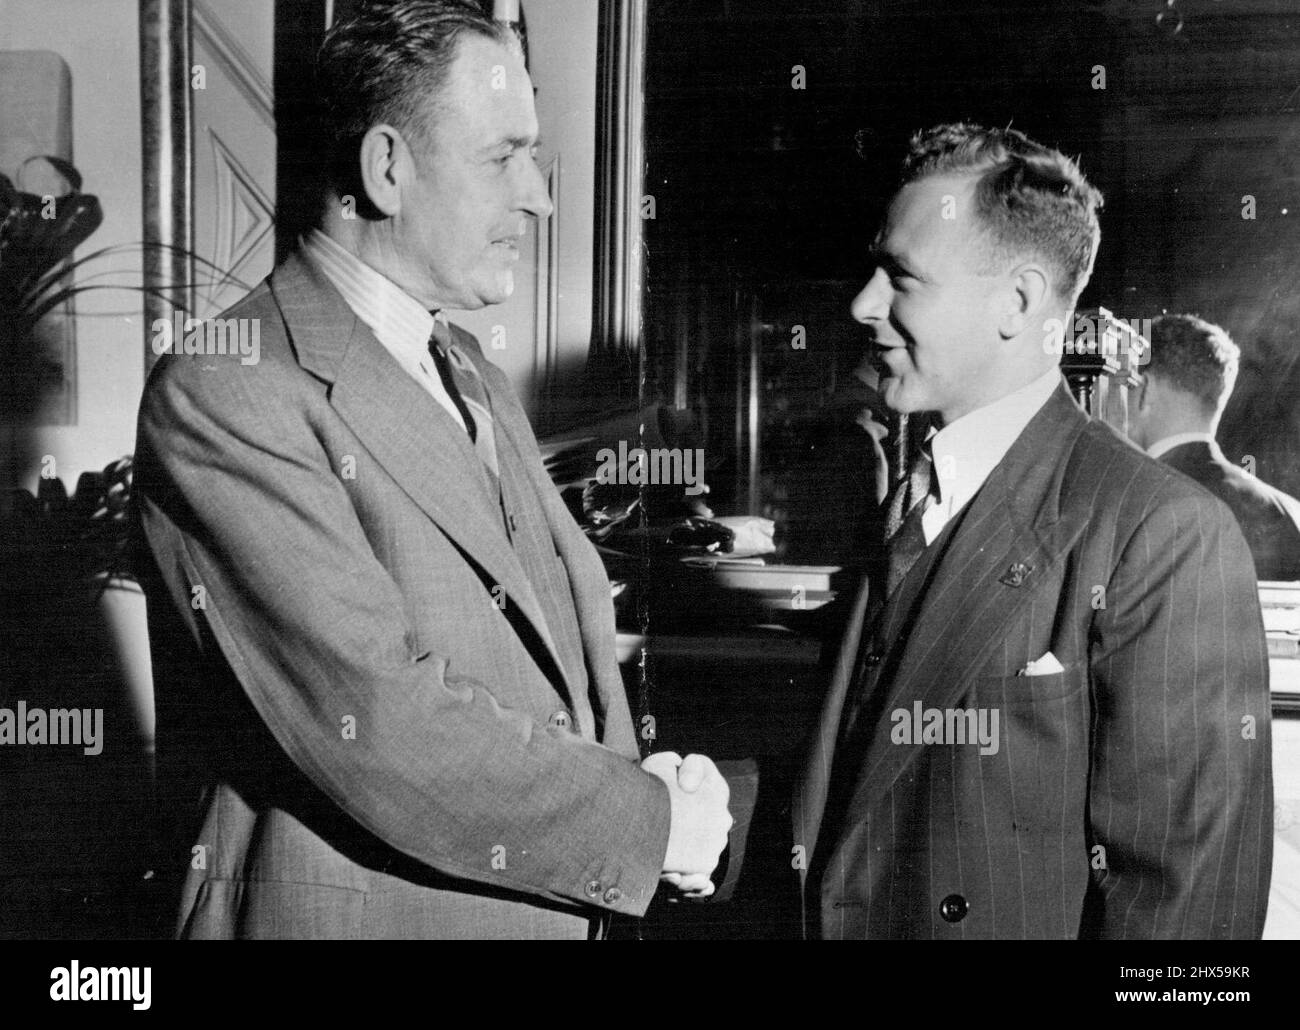 One Cricketer To Another -- Deputy Town Clerk of Sydney (Mr. E.W. Adams) congratulates Arthur Morris, a clerk at the Town Hall, on his selection in the Australian Test team. Mr. Adams formerly played first grade cricket with Morris' club, St. George. November 20, 1946. Stock Photo